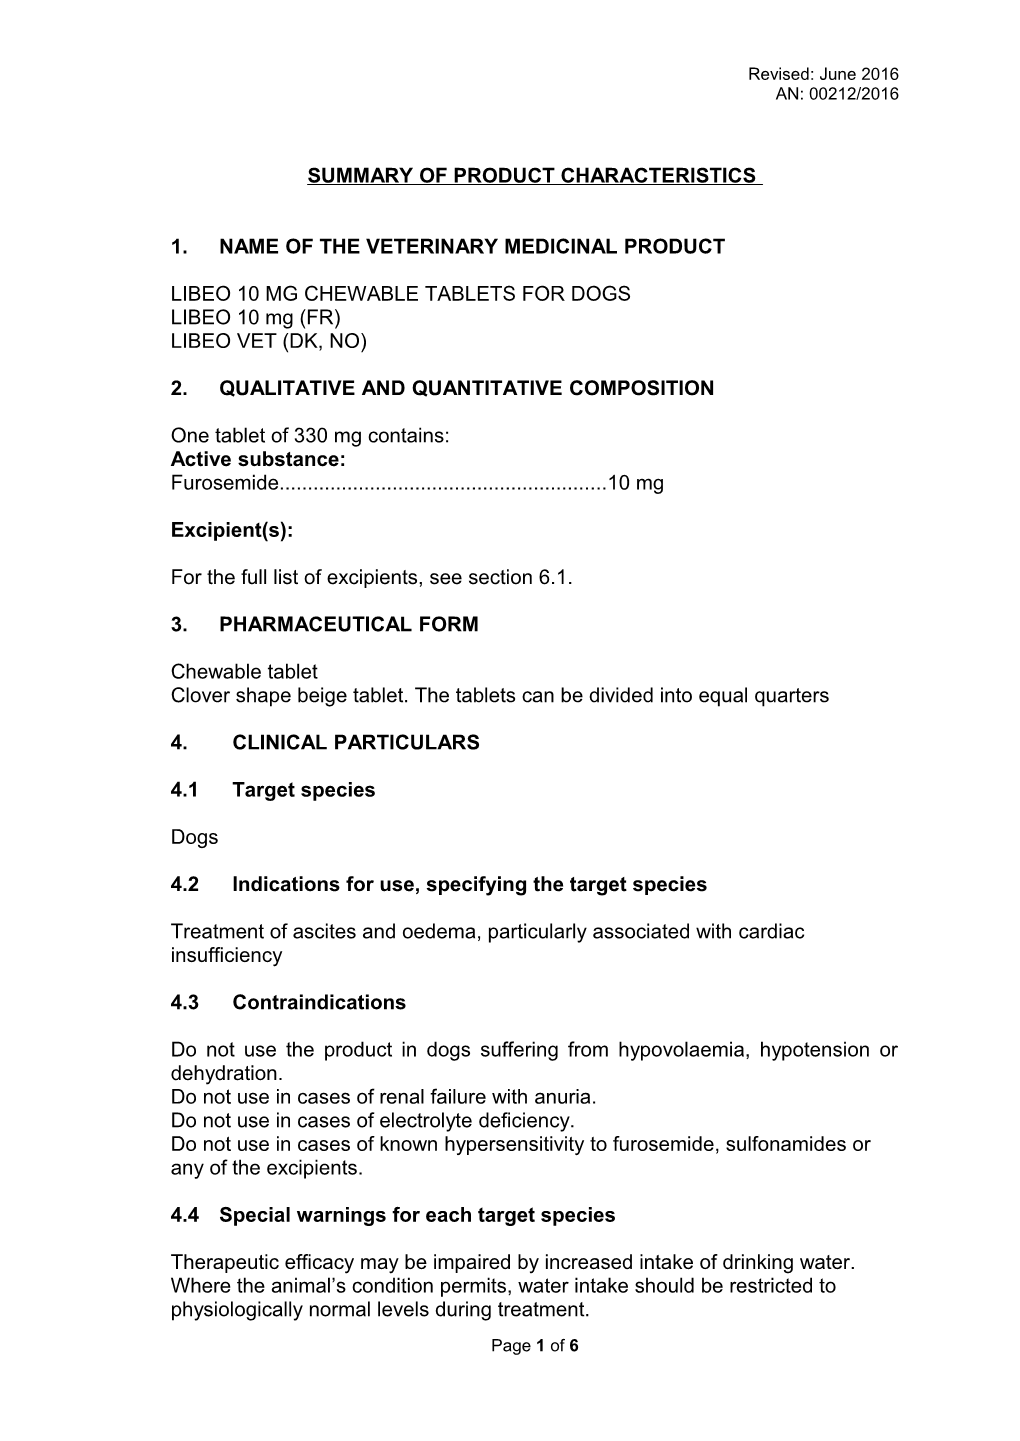 1. Name of the Veterinary Medicinal Product s19